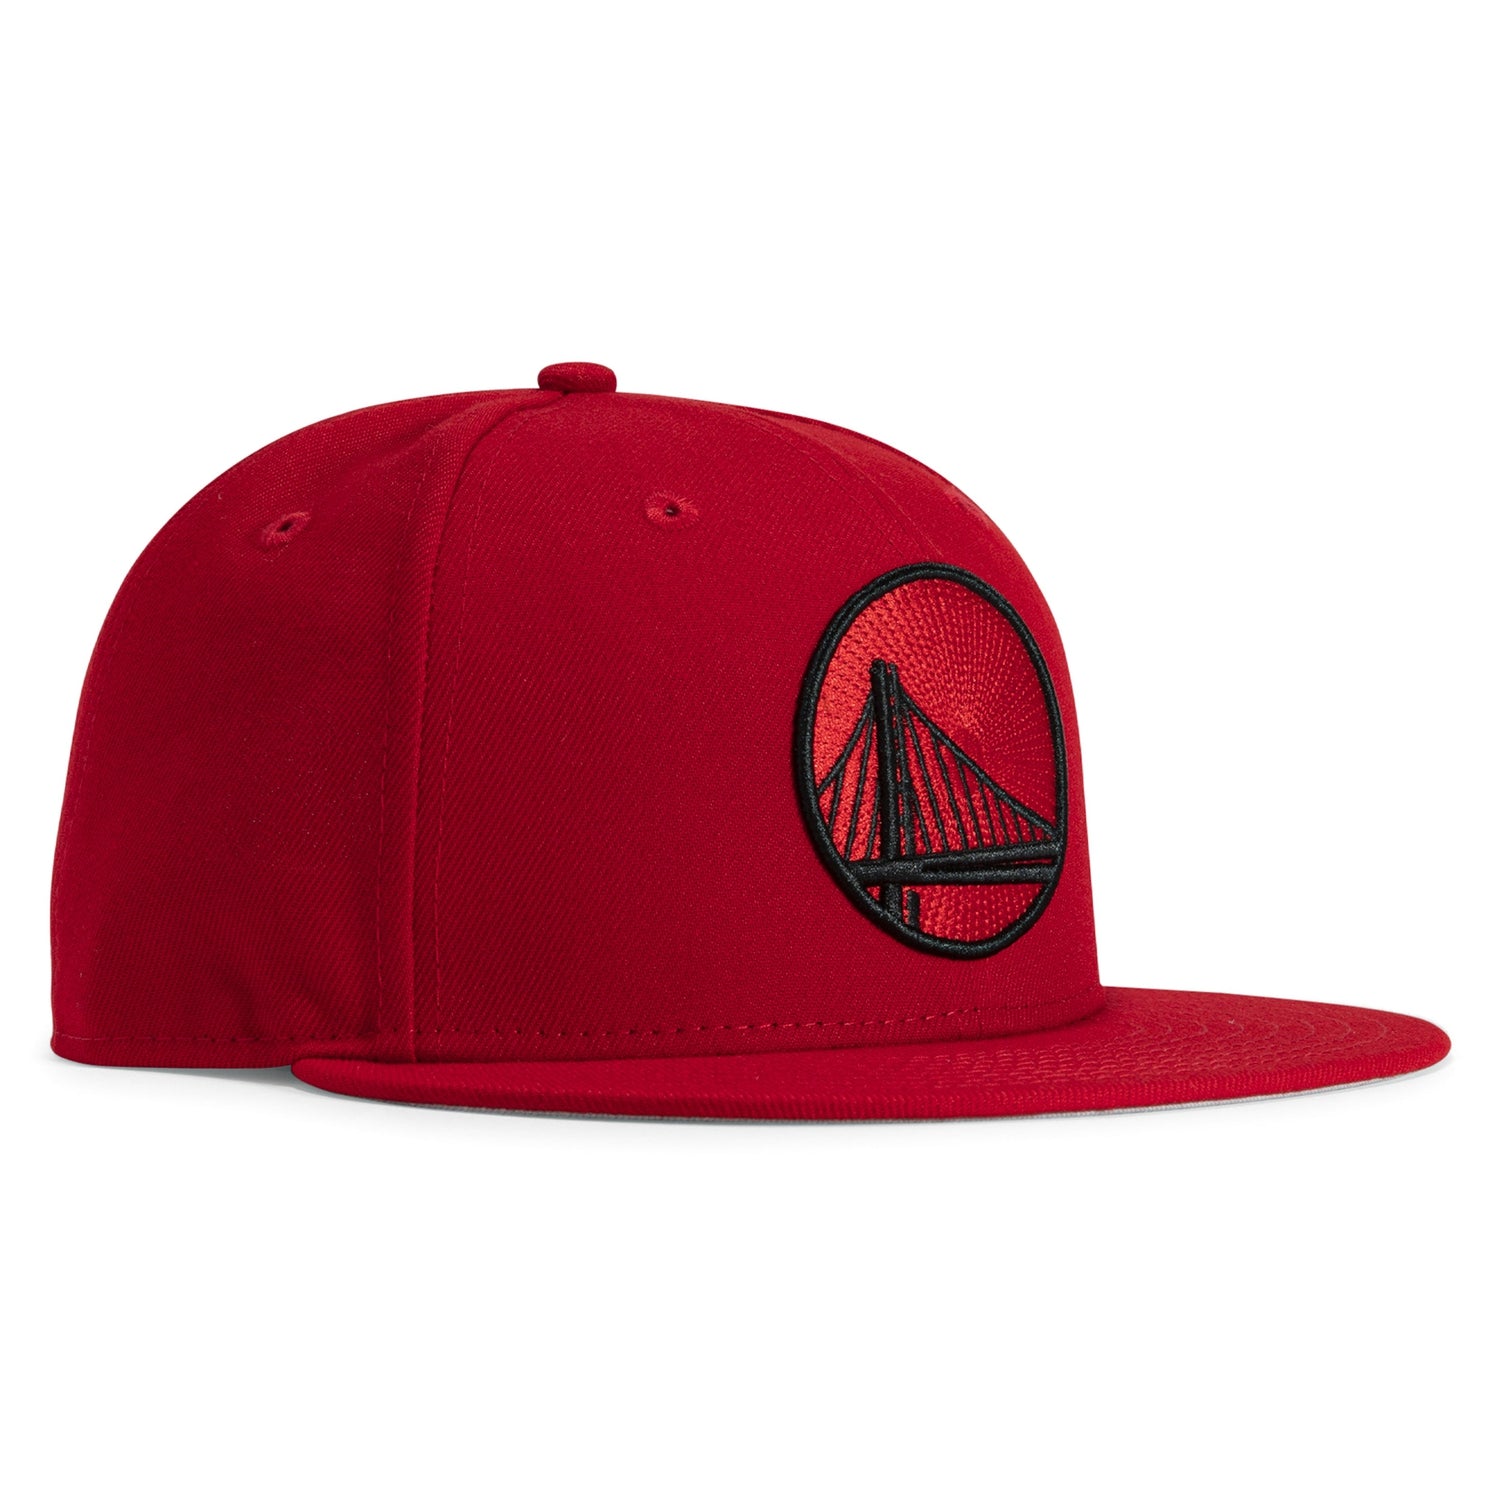 Mitchell & Ness Golden State Warriors All Star Color Snapback Hat, White/Red